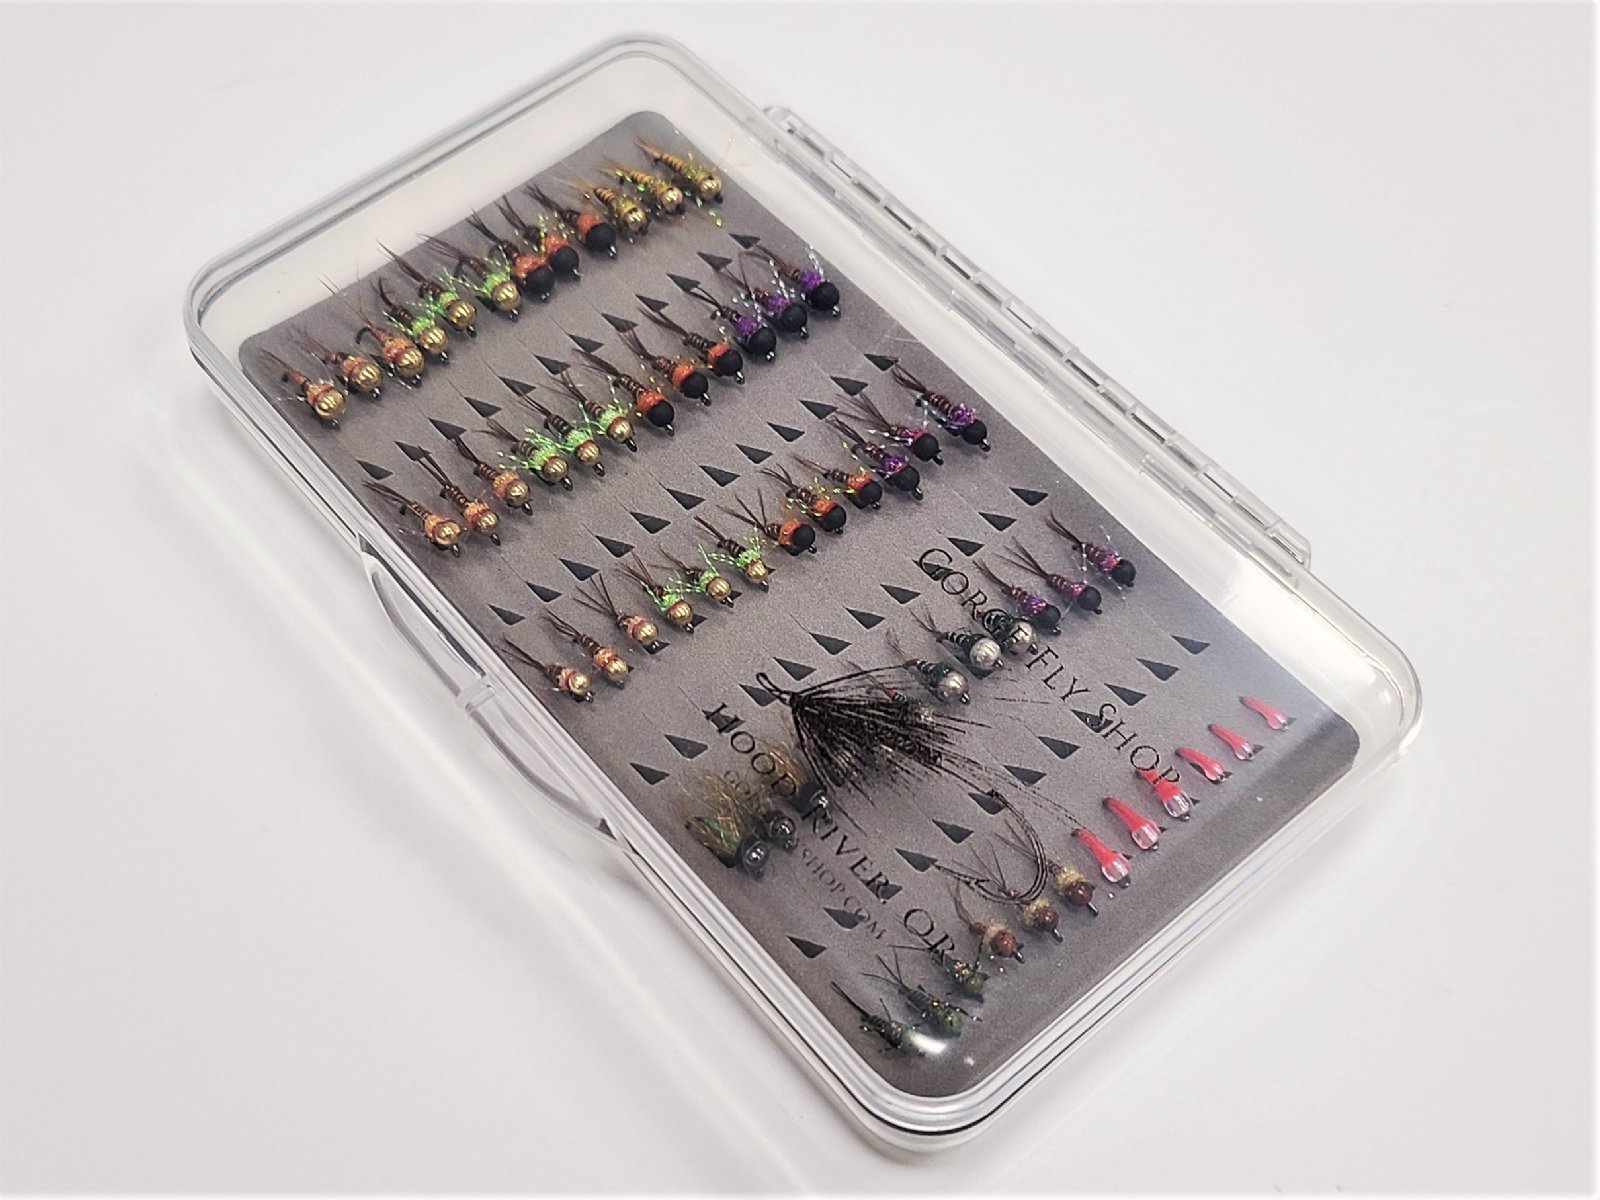 Euro Nymphing Fly Selection / Euro Nymphing Crate - The Fly Crate